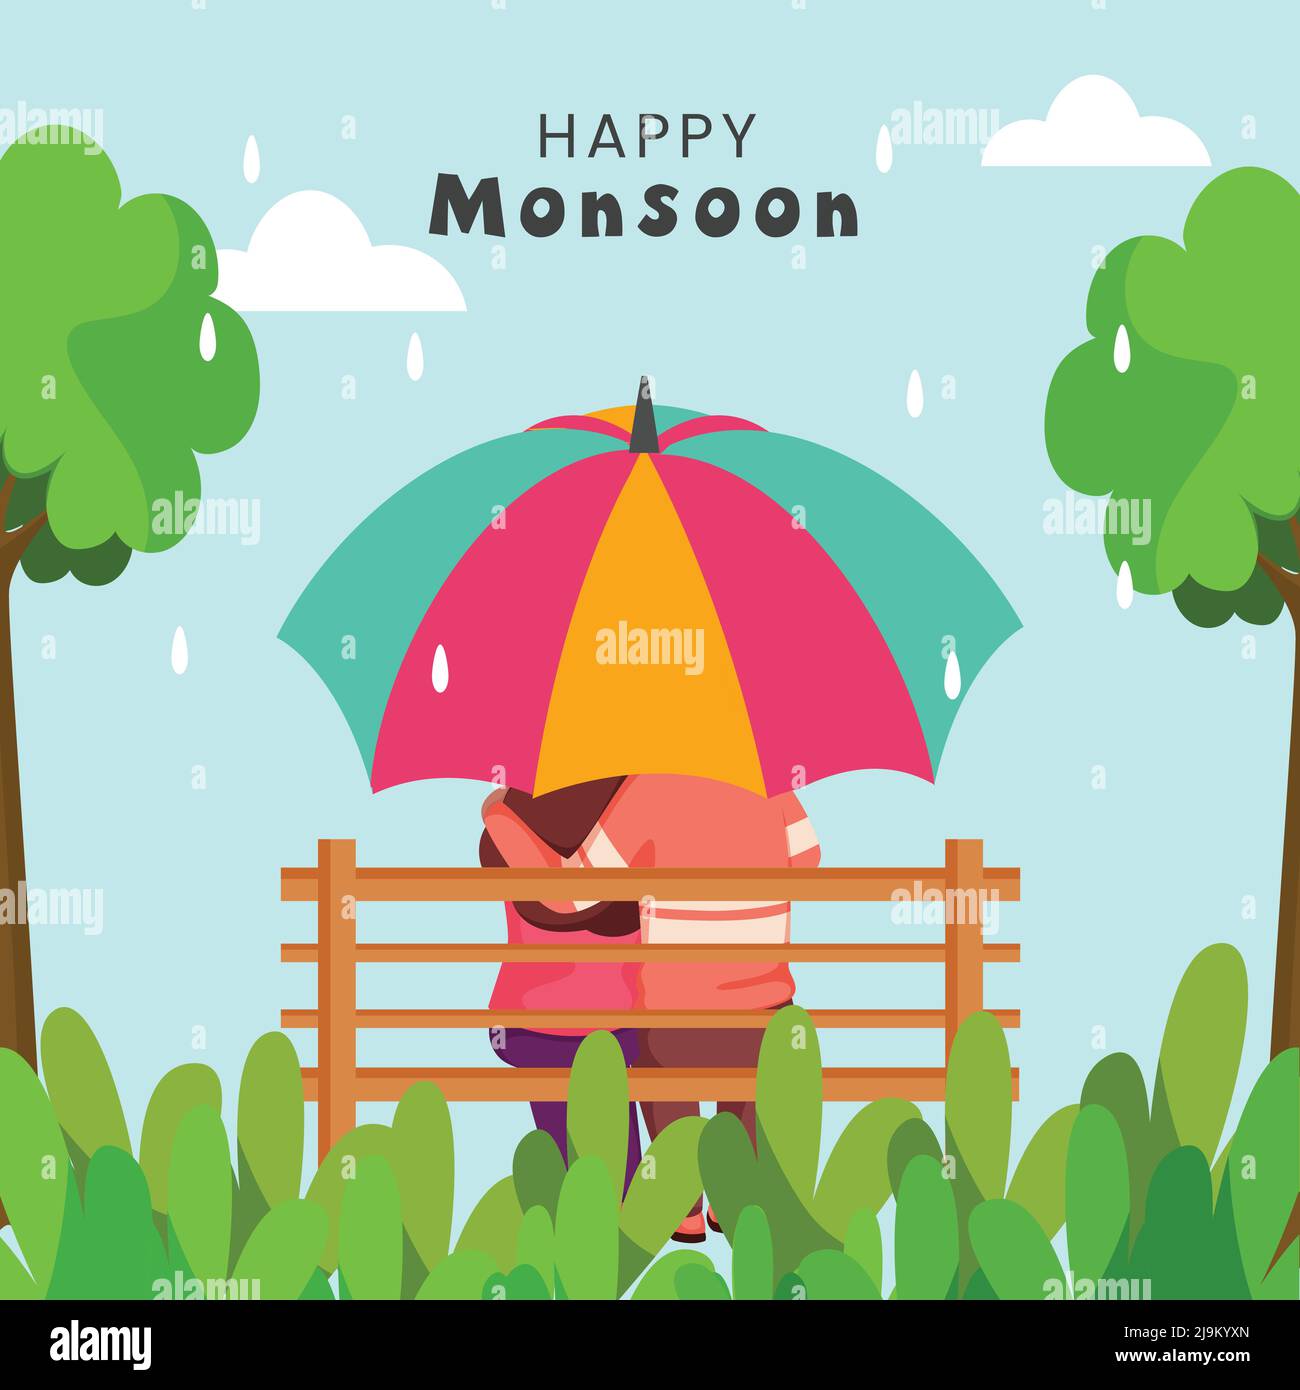 Happy Monsoon Poster Design With Back View Of Young Couple Sitting At Bench Under Umbrella And Trees On Water Drops Cyan Background. Stock Vector